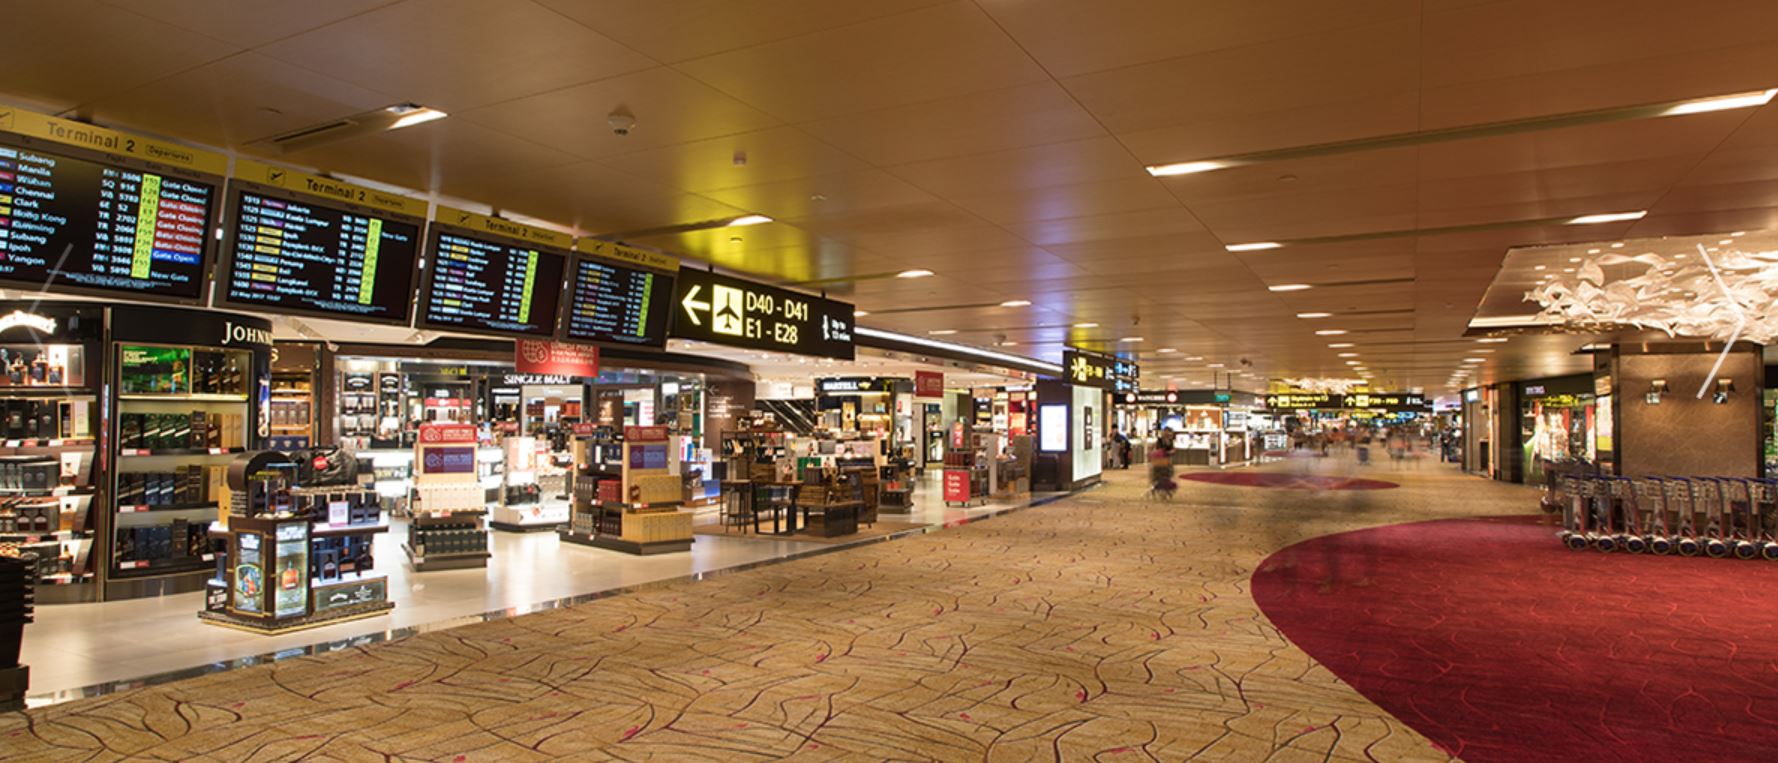 Changi Airport Terminal 2 to reopen in phases from May 29 after 2